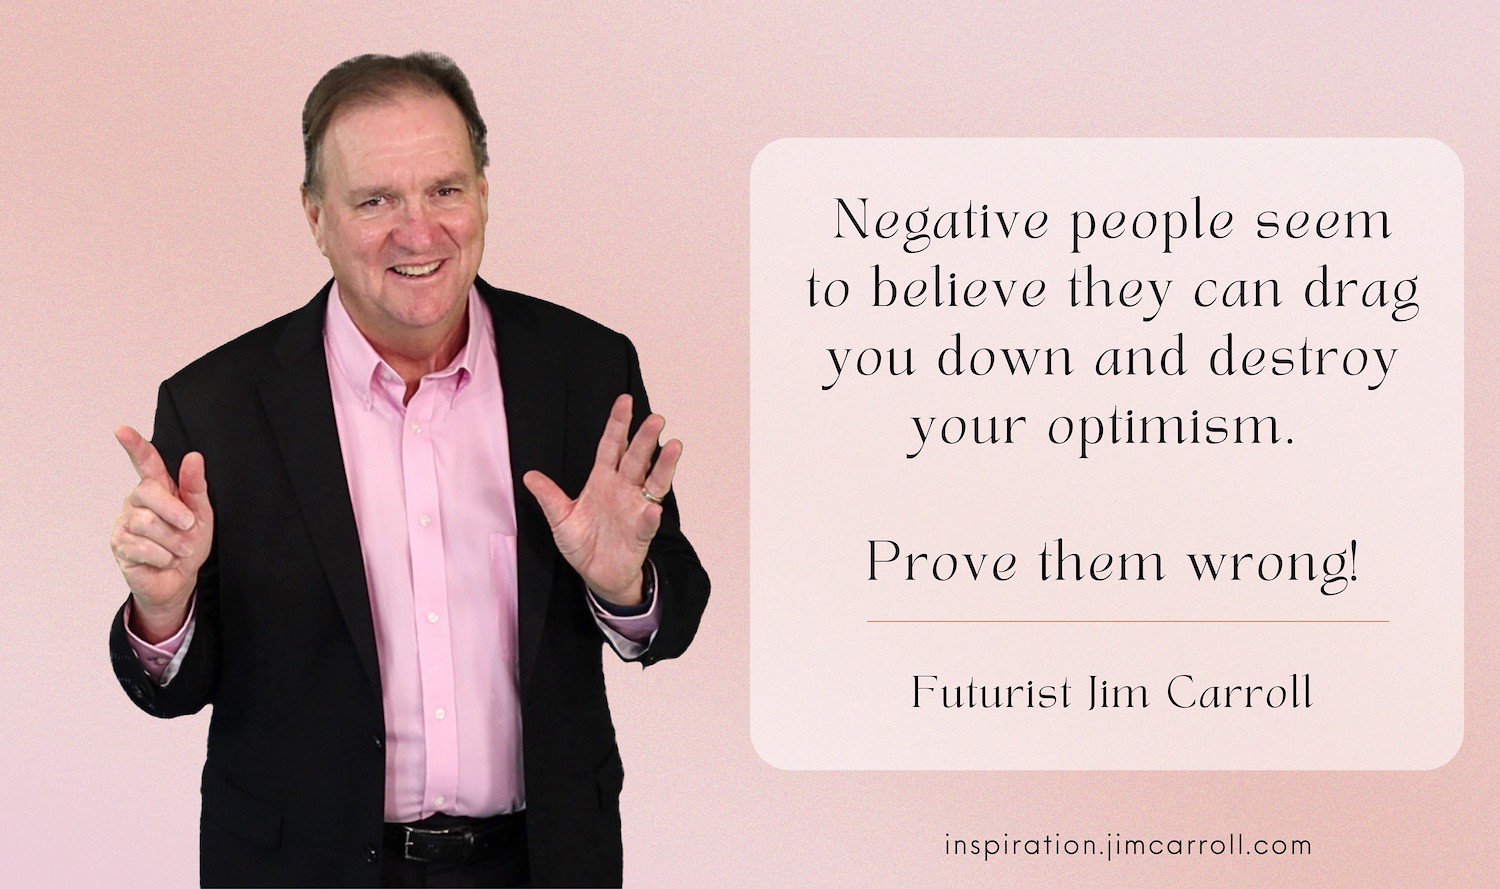 "Negative people seem to believe they can drag you down and destroy your optimism. Prove them wrong!" - Futurist Jim Carroll